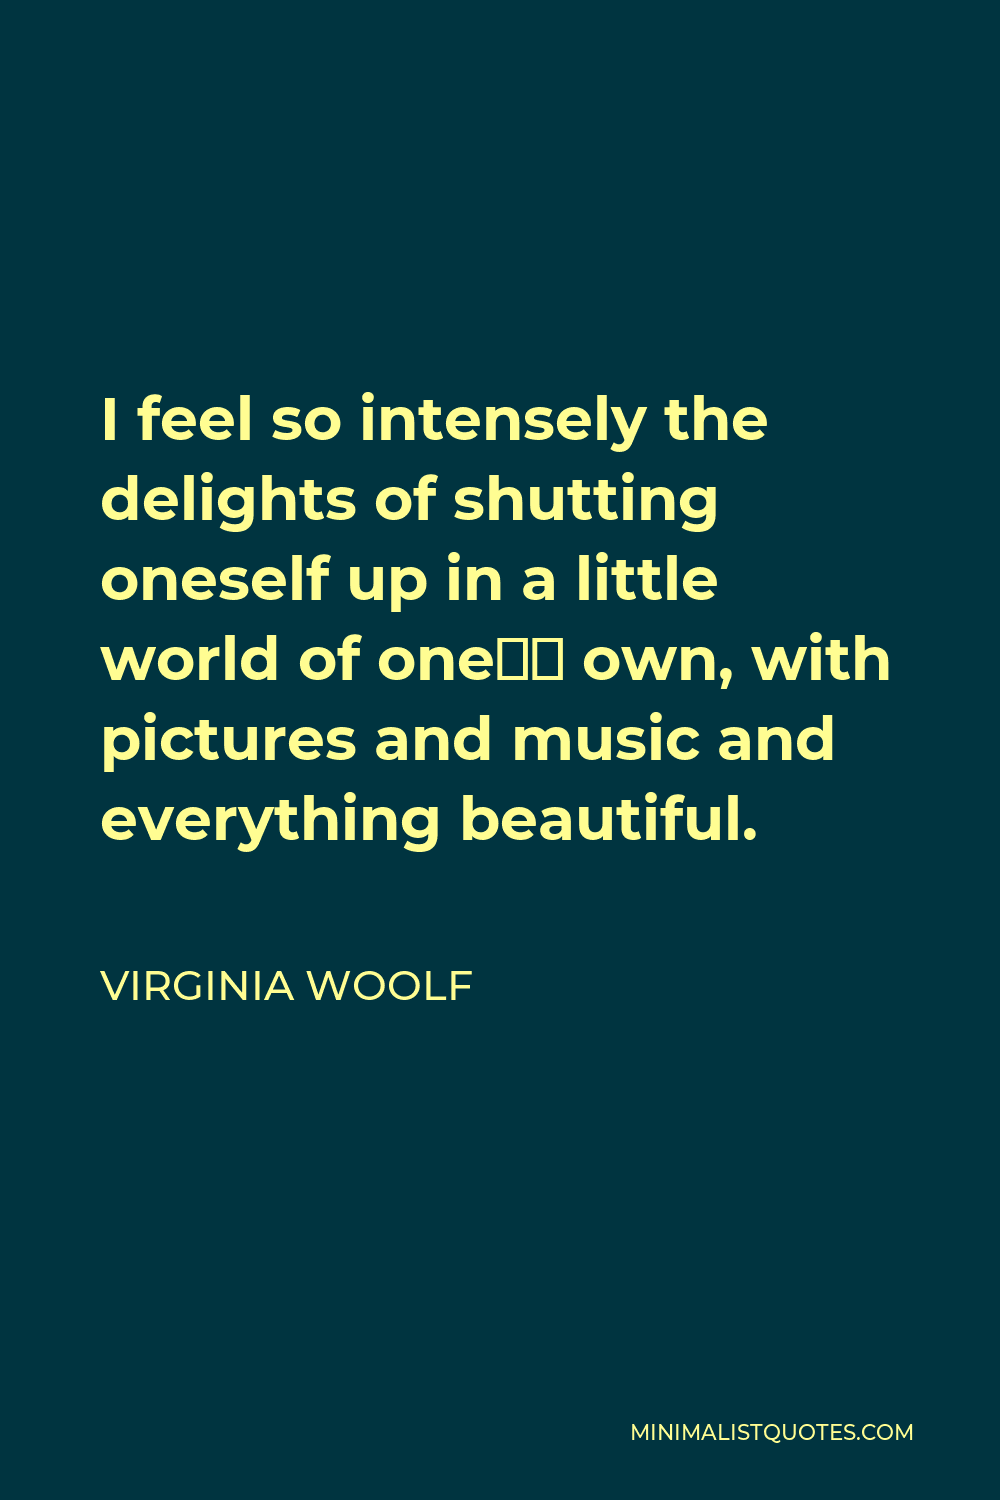 Virginia Woolf Quote - I feel so intensely the delights of shutting oneself up in a little world of one’s own, with pictures and music and everything beautiful.